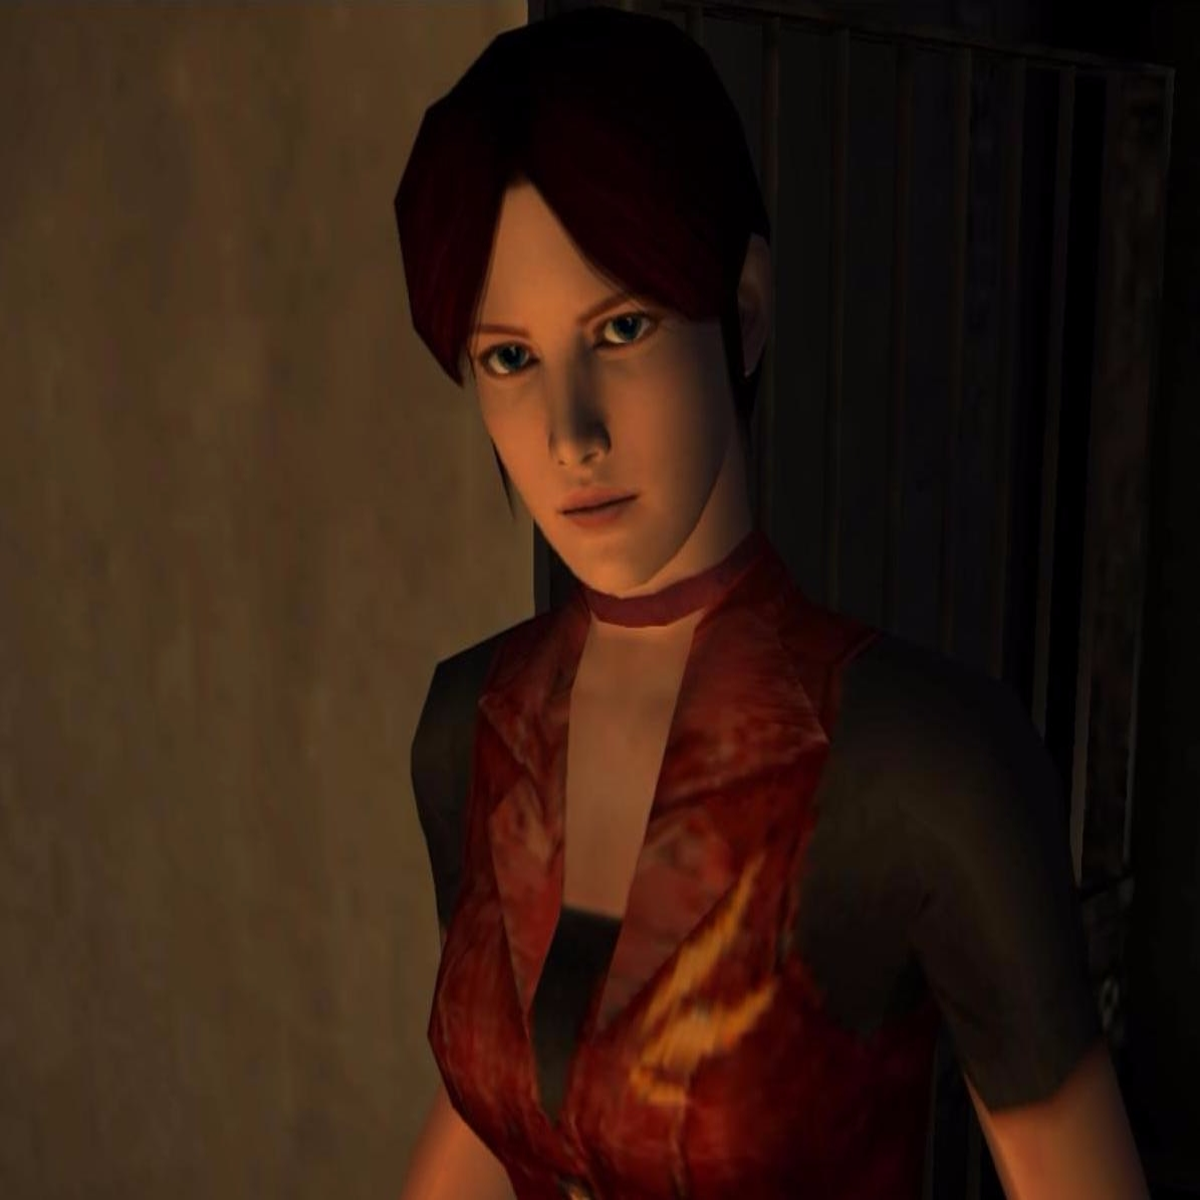 Resident Evil - CODE: Veronica X HD Project